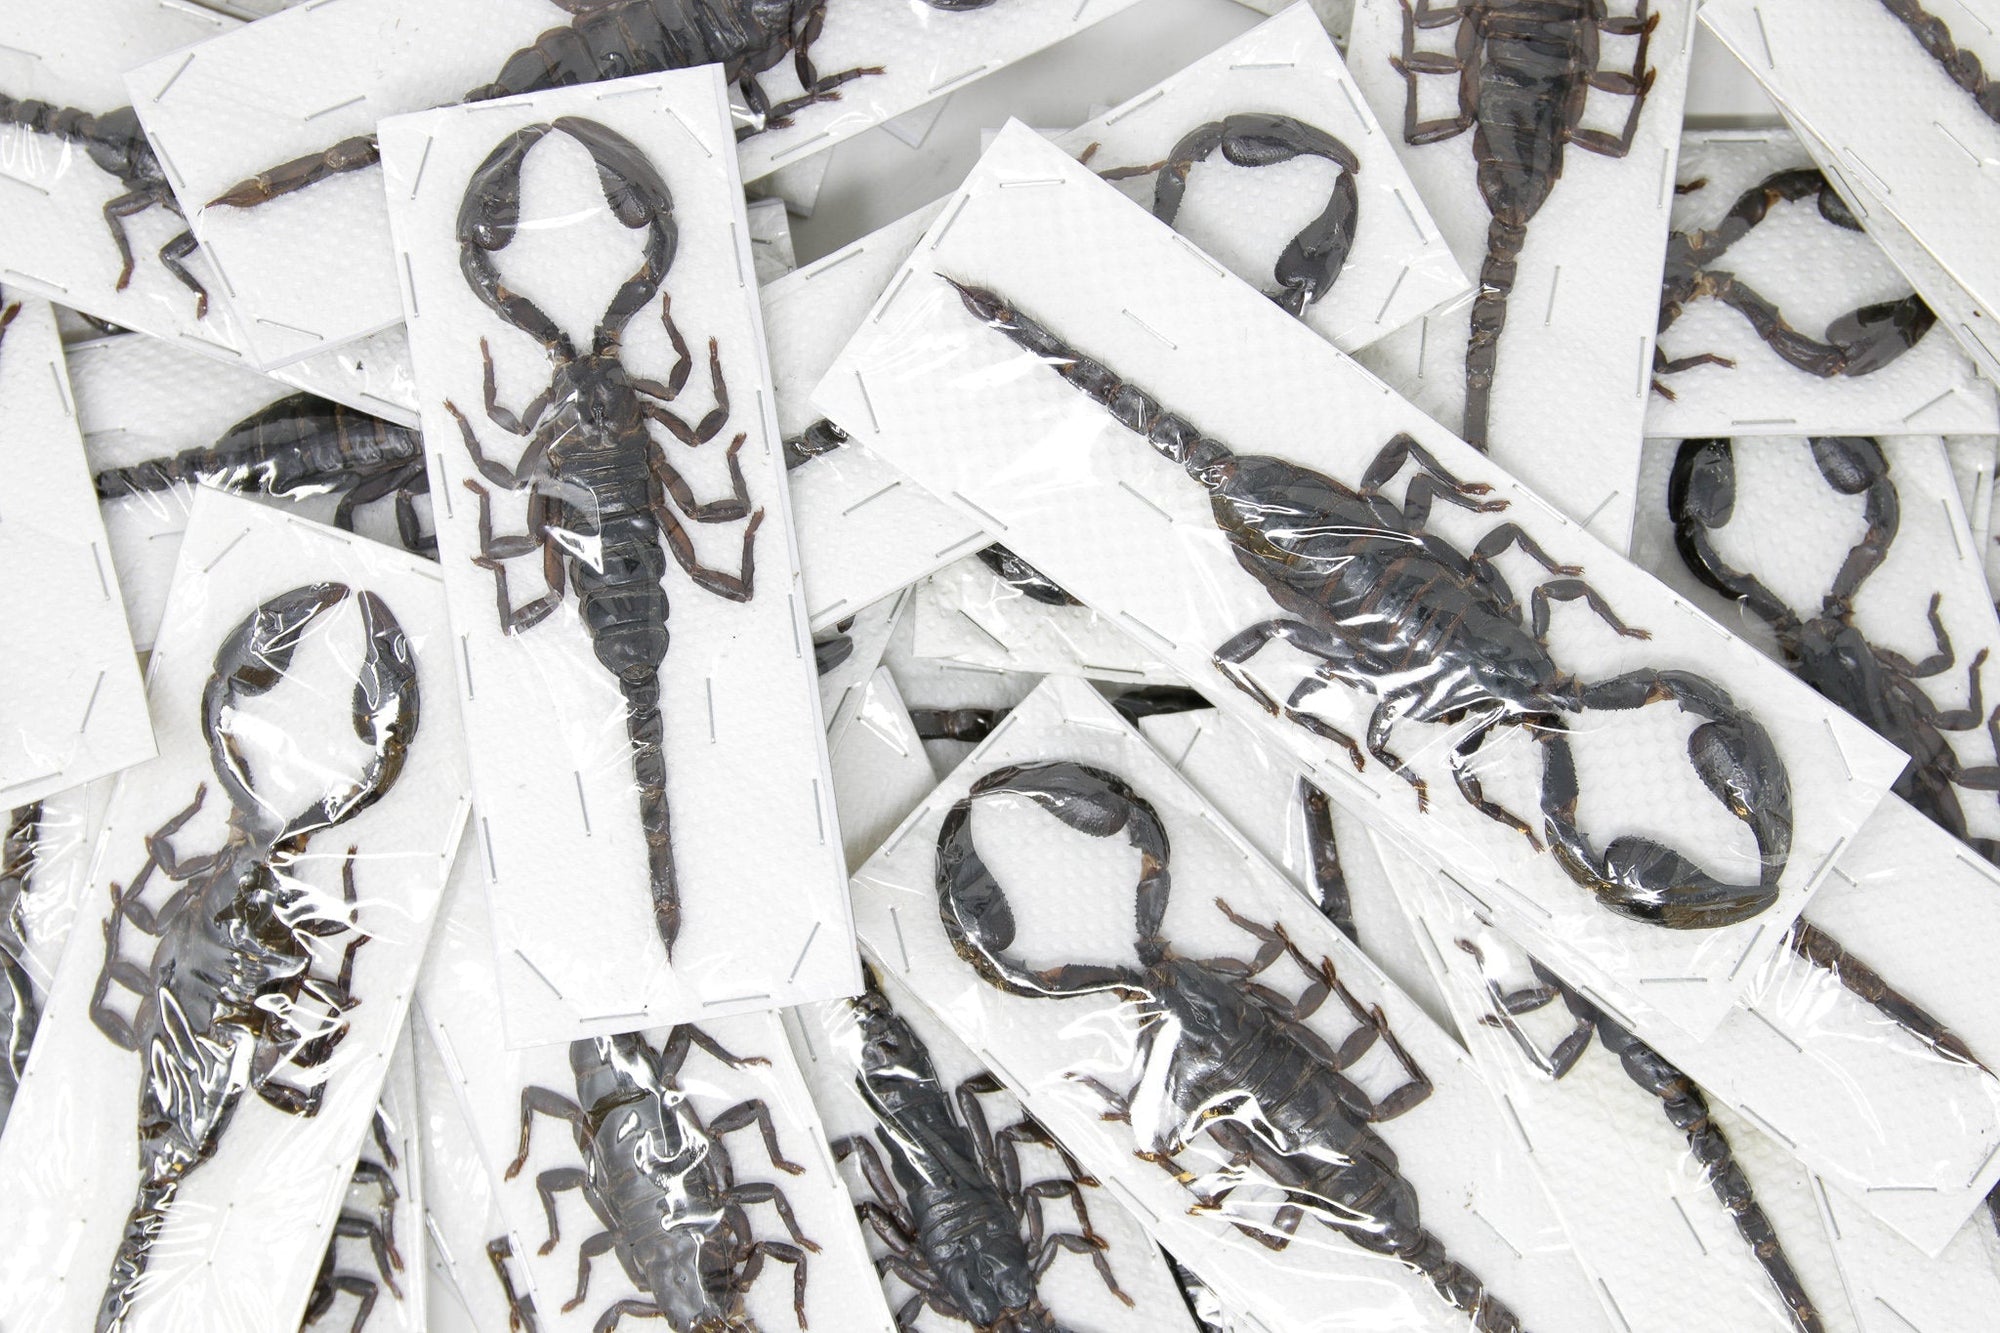 WHOLESALE 100 x Heterometrus spinifer | Giant Forest Scorpions | A1 Unmounted Specimens